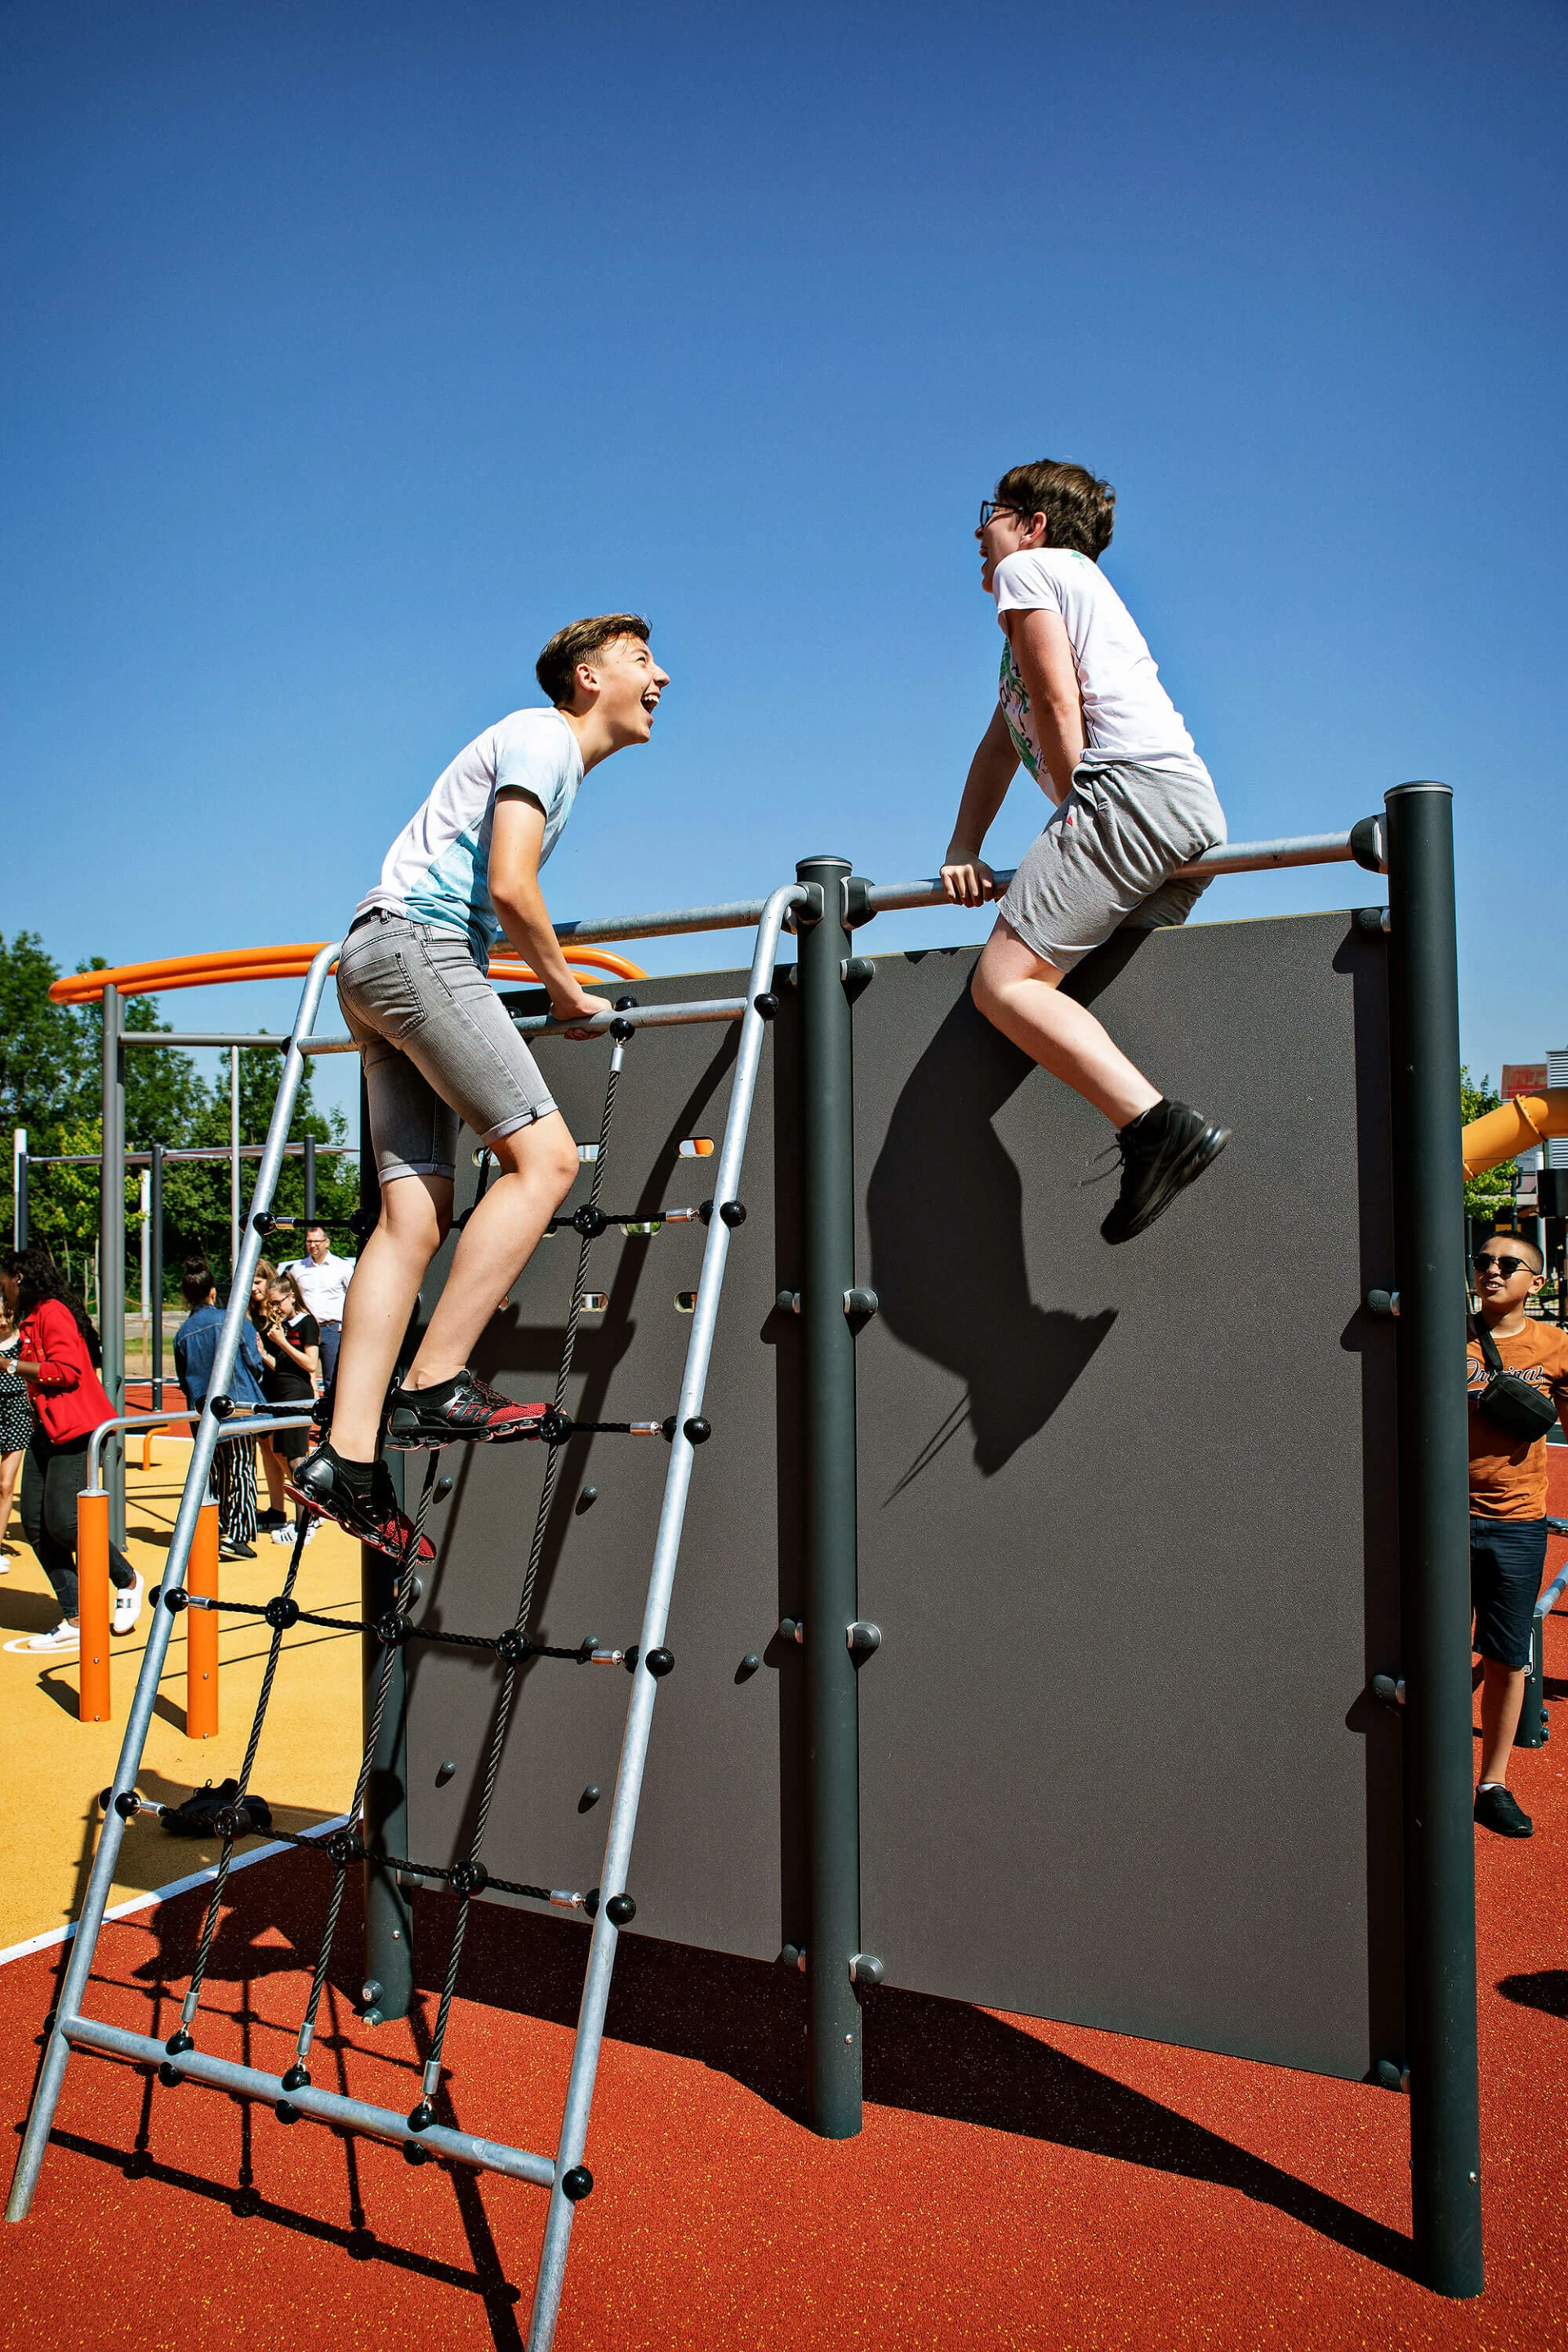 outdoor obstacle courses ninja warrior assault course equipment reference image